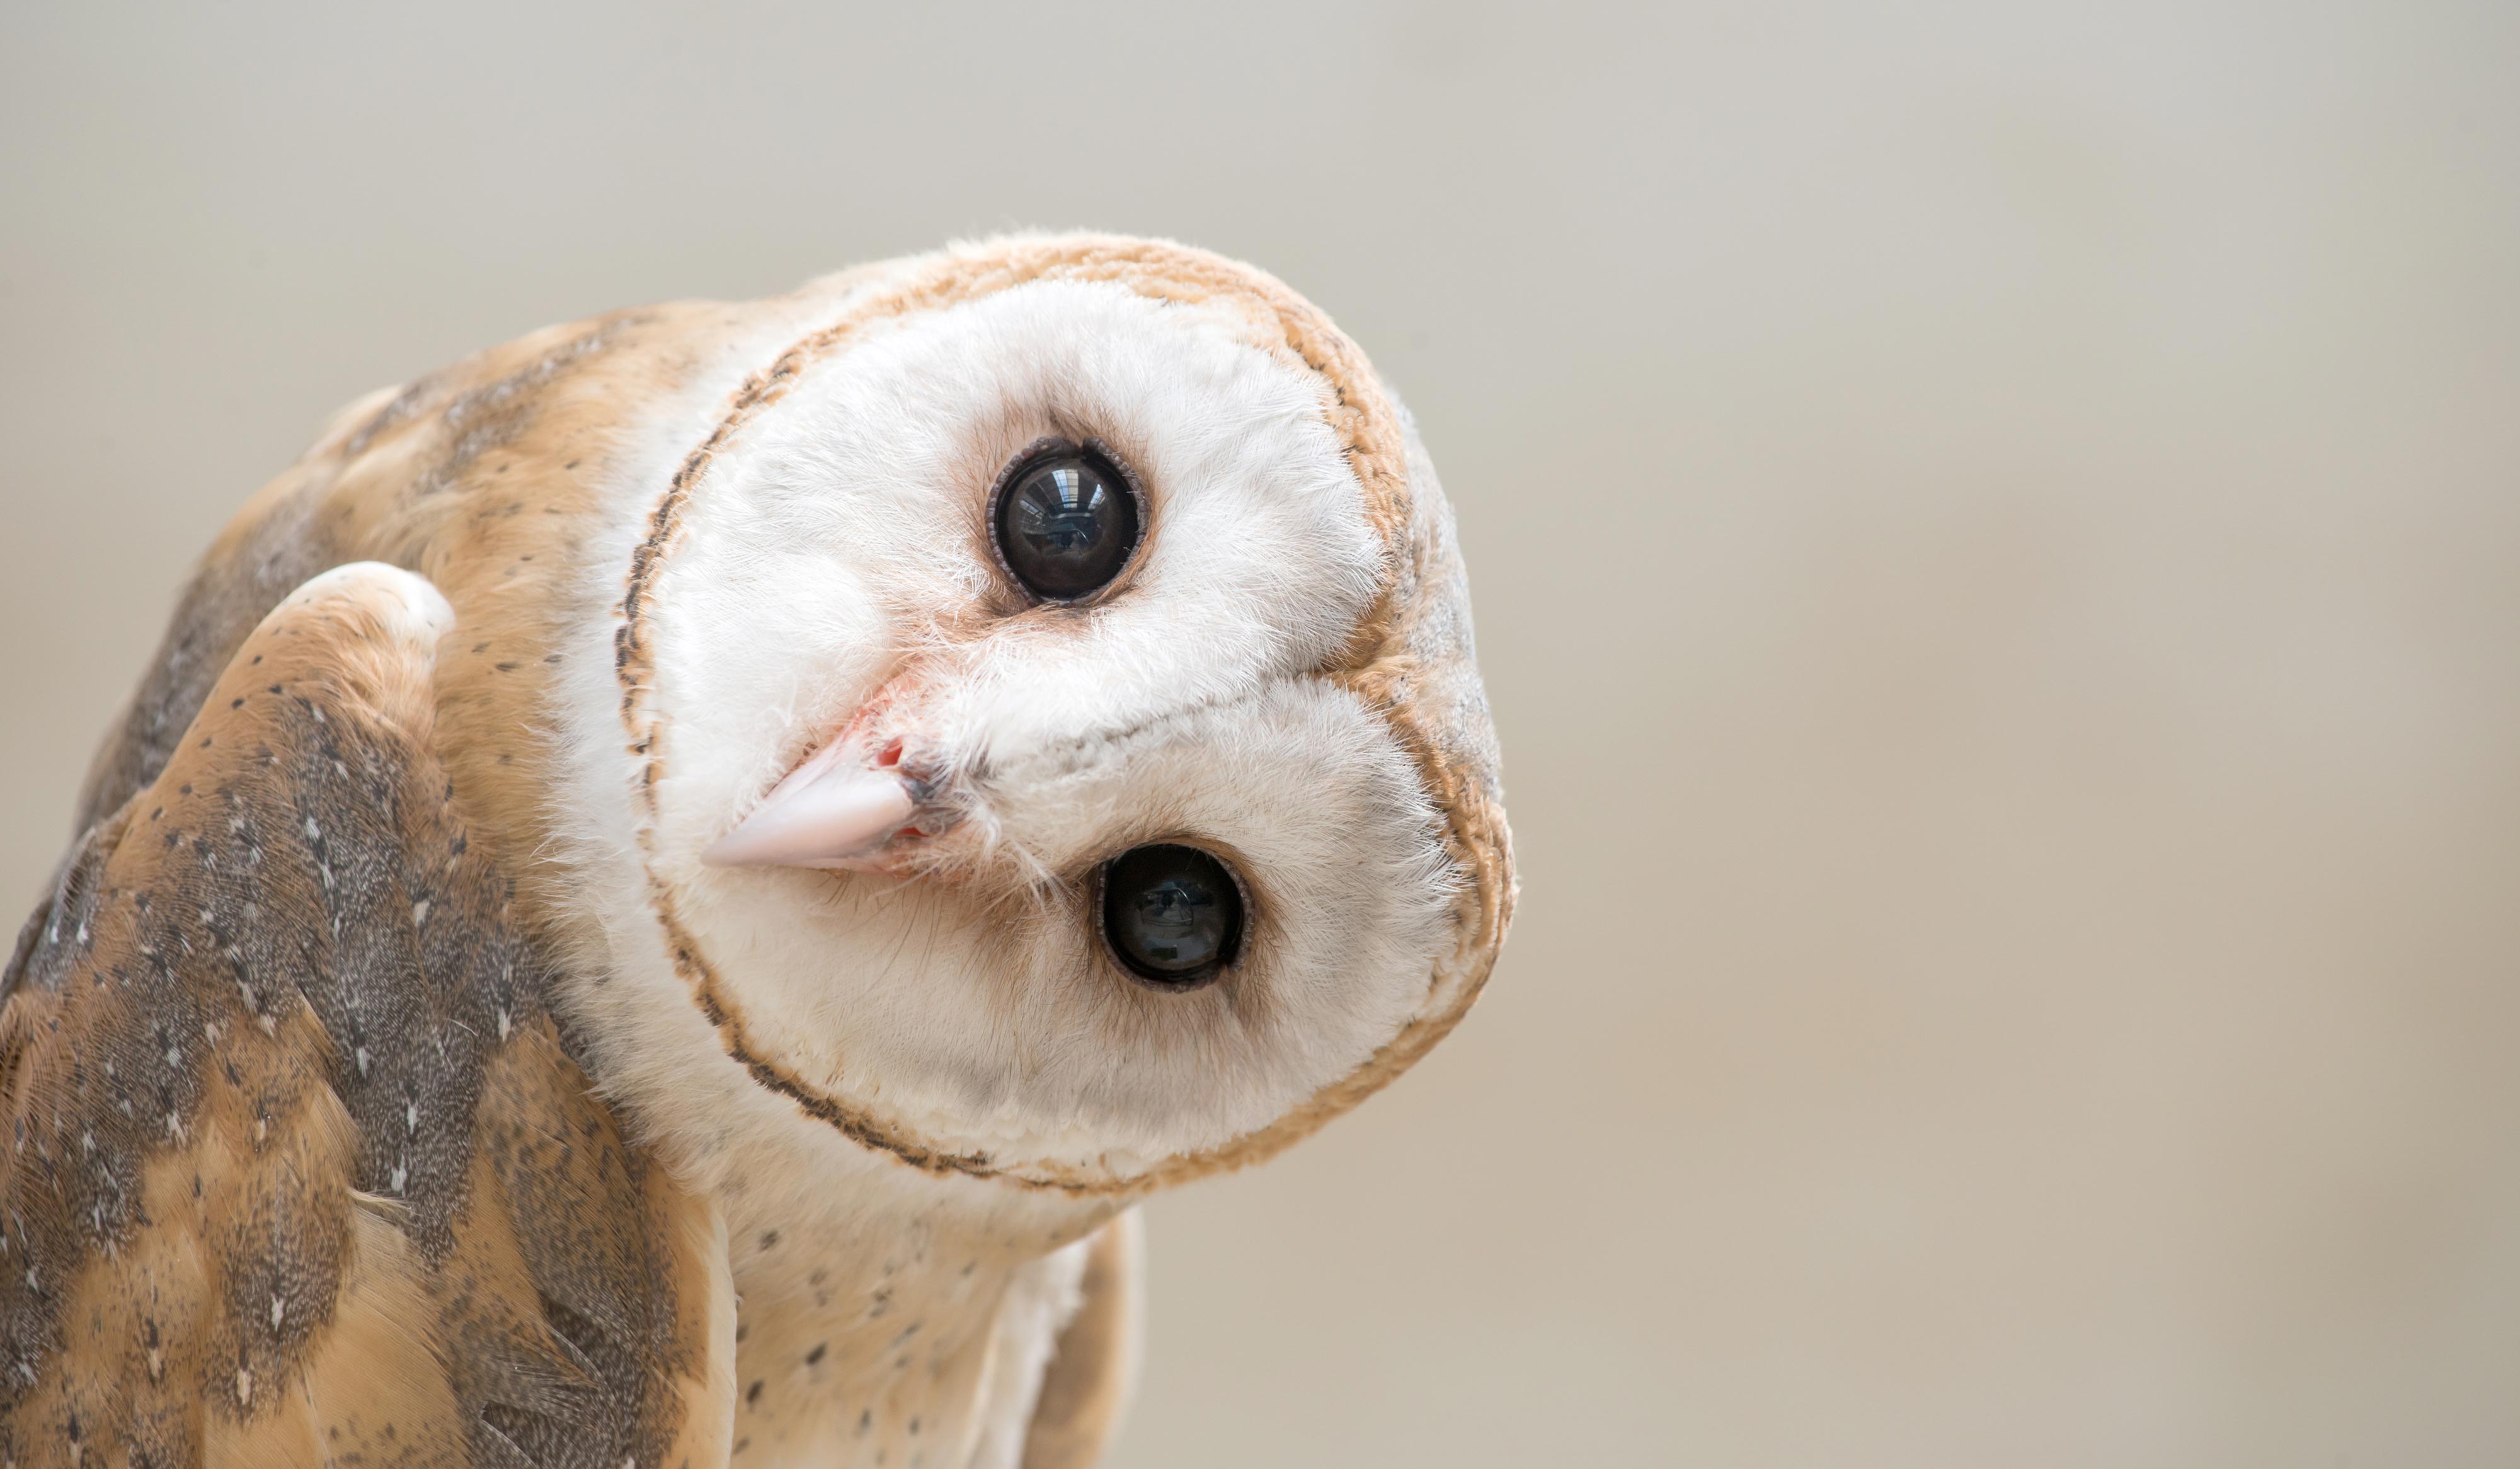 A barn owl looking at the camera with its neck turned.